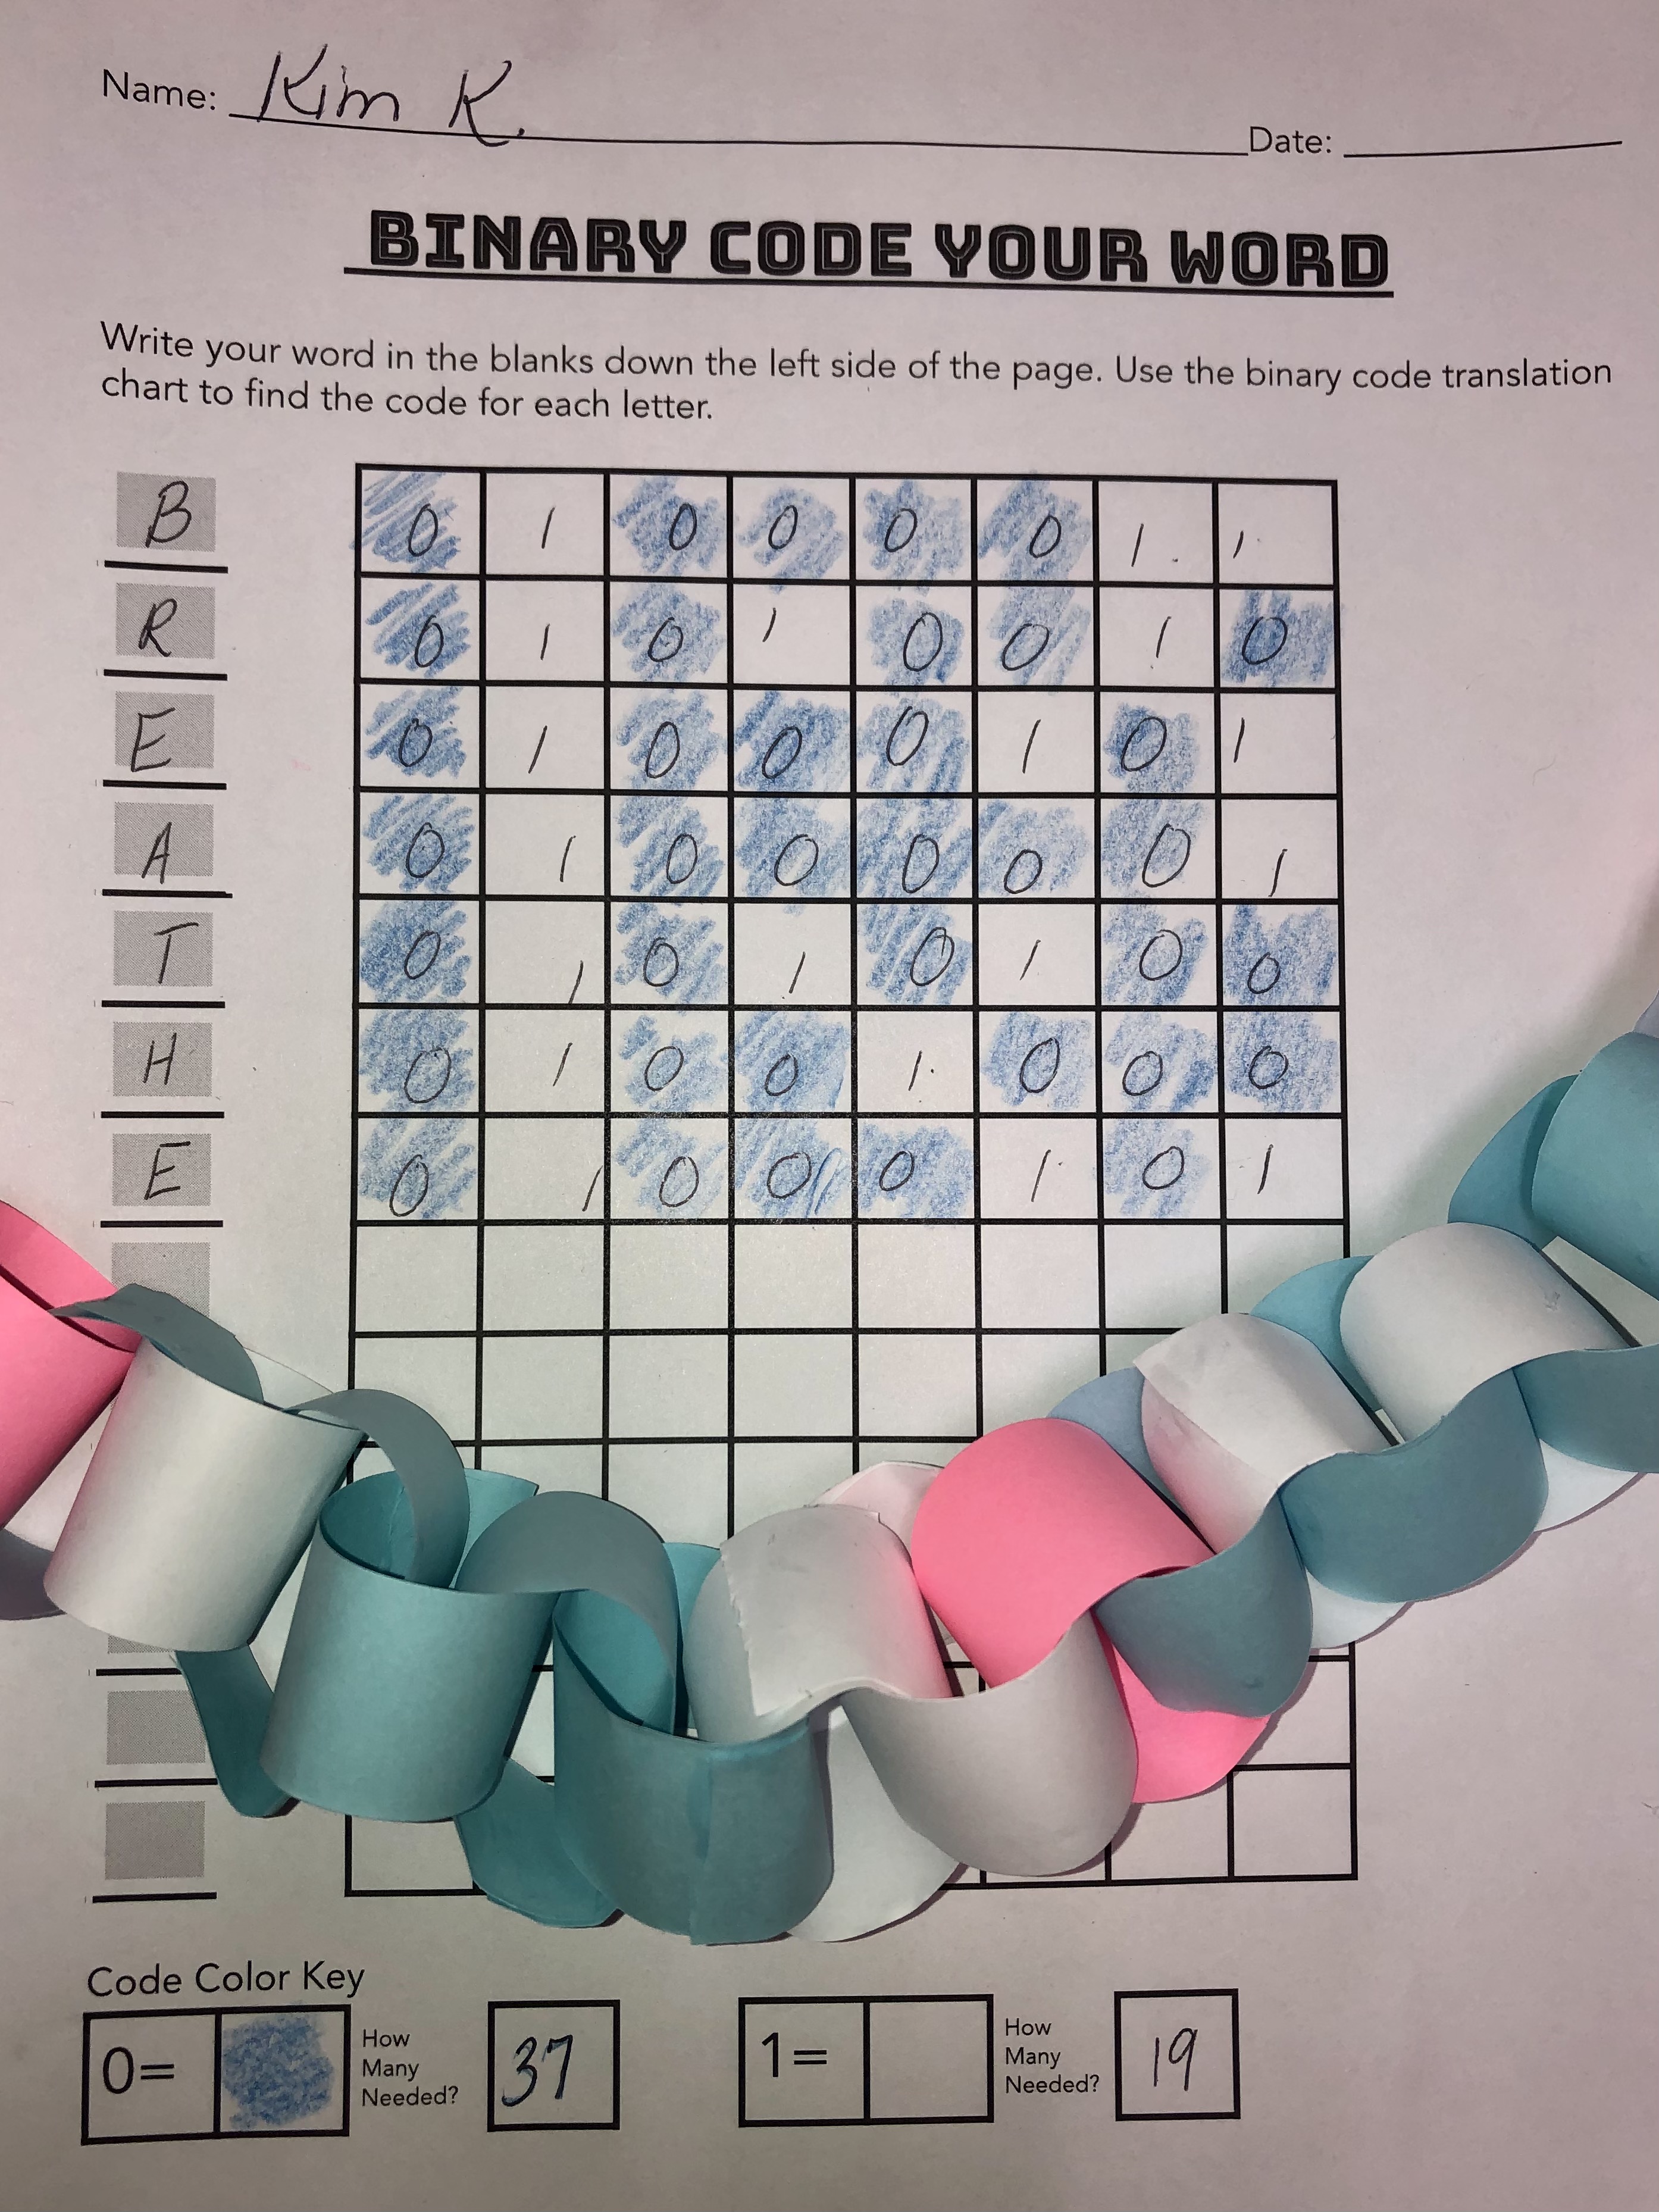 photo of Binary Code Your Word sheet with paper chain example